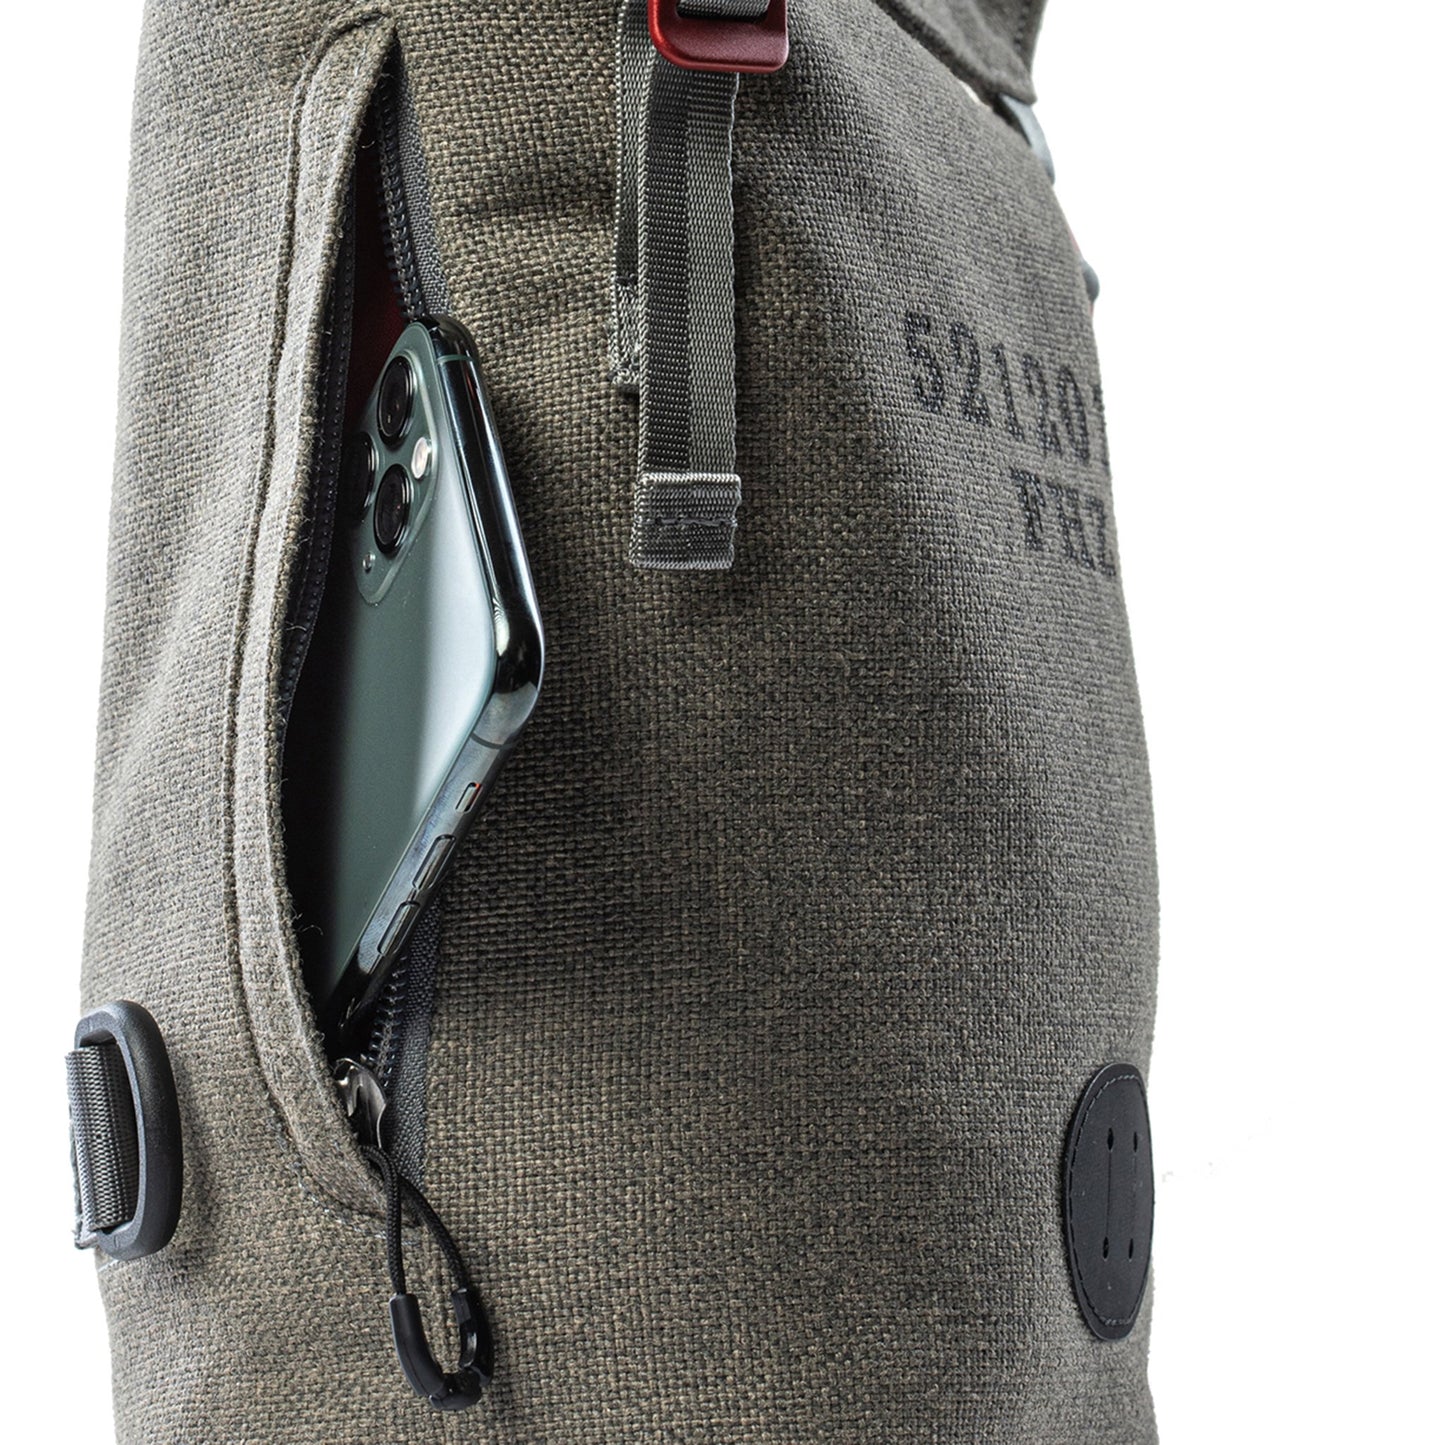 Phone zipper pouch on a Fierce Hazel gender-neutral shoulder bag and convertible backpack. Sling pack and camera bag